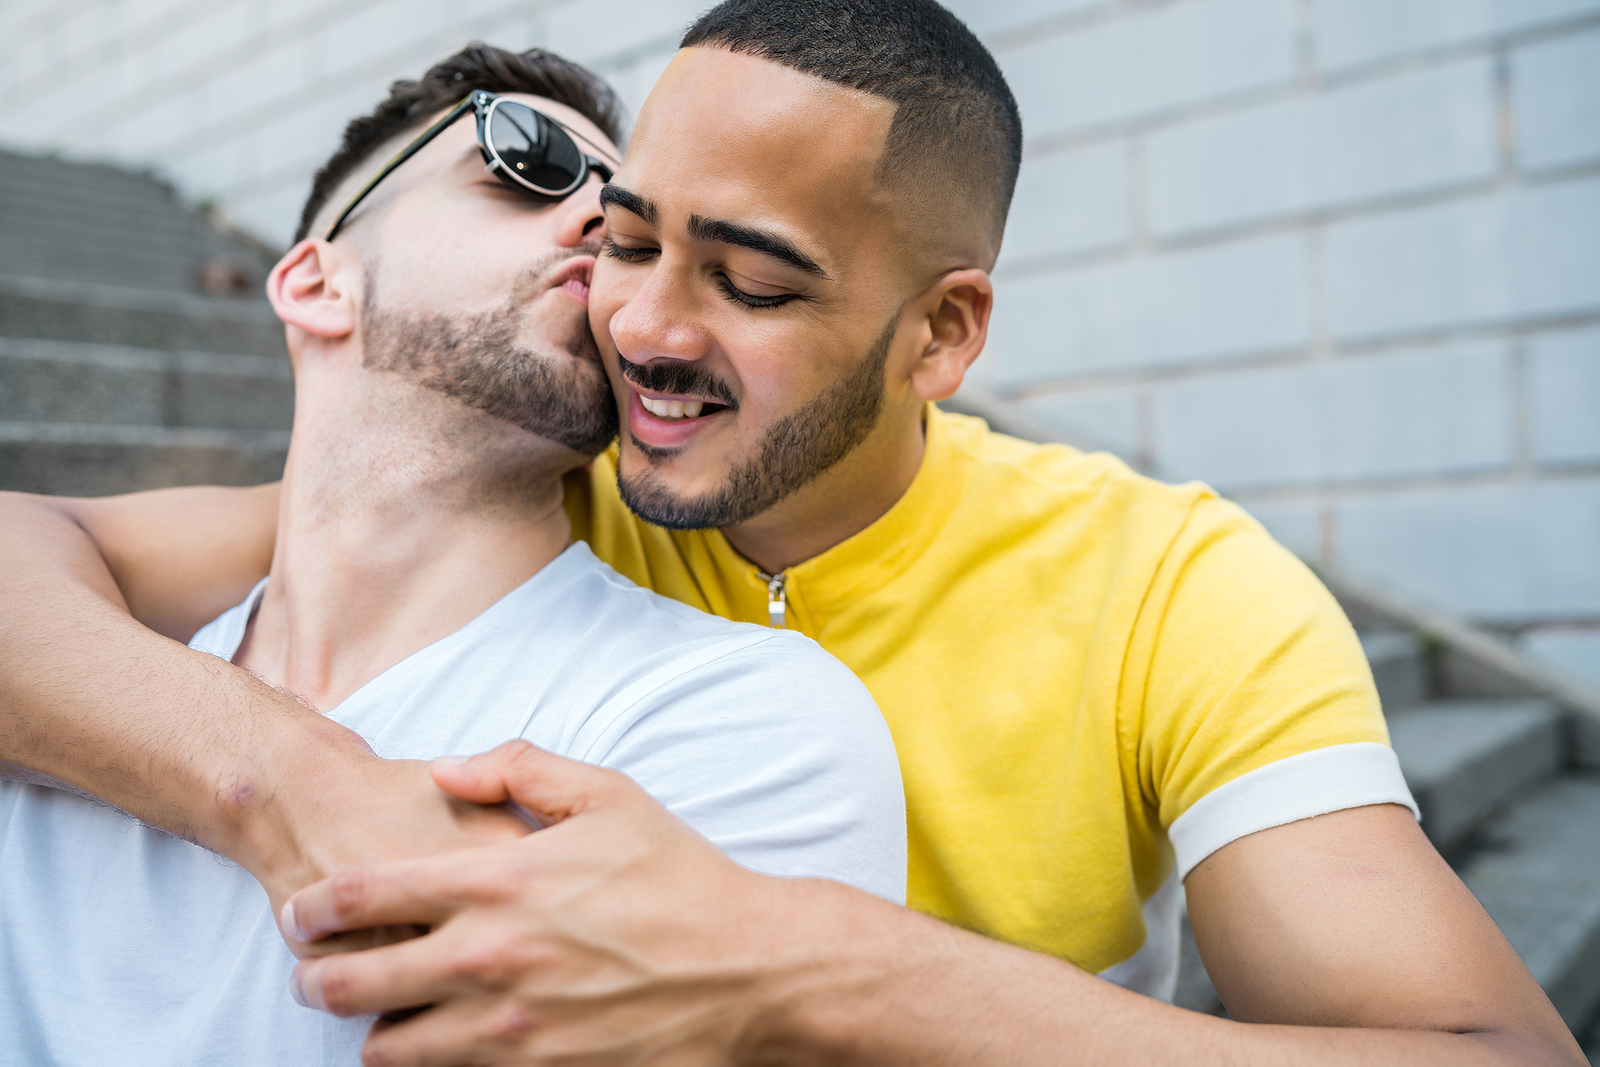 Two multi ethnic young men kiss. One has his arms wrapped around the other smiling.